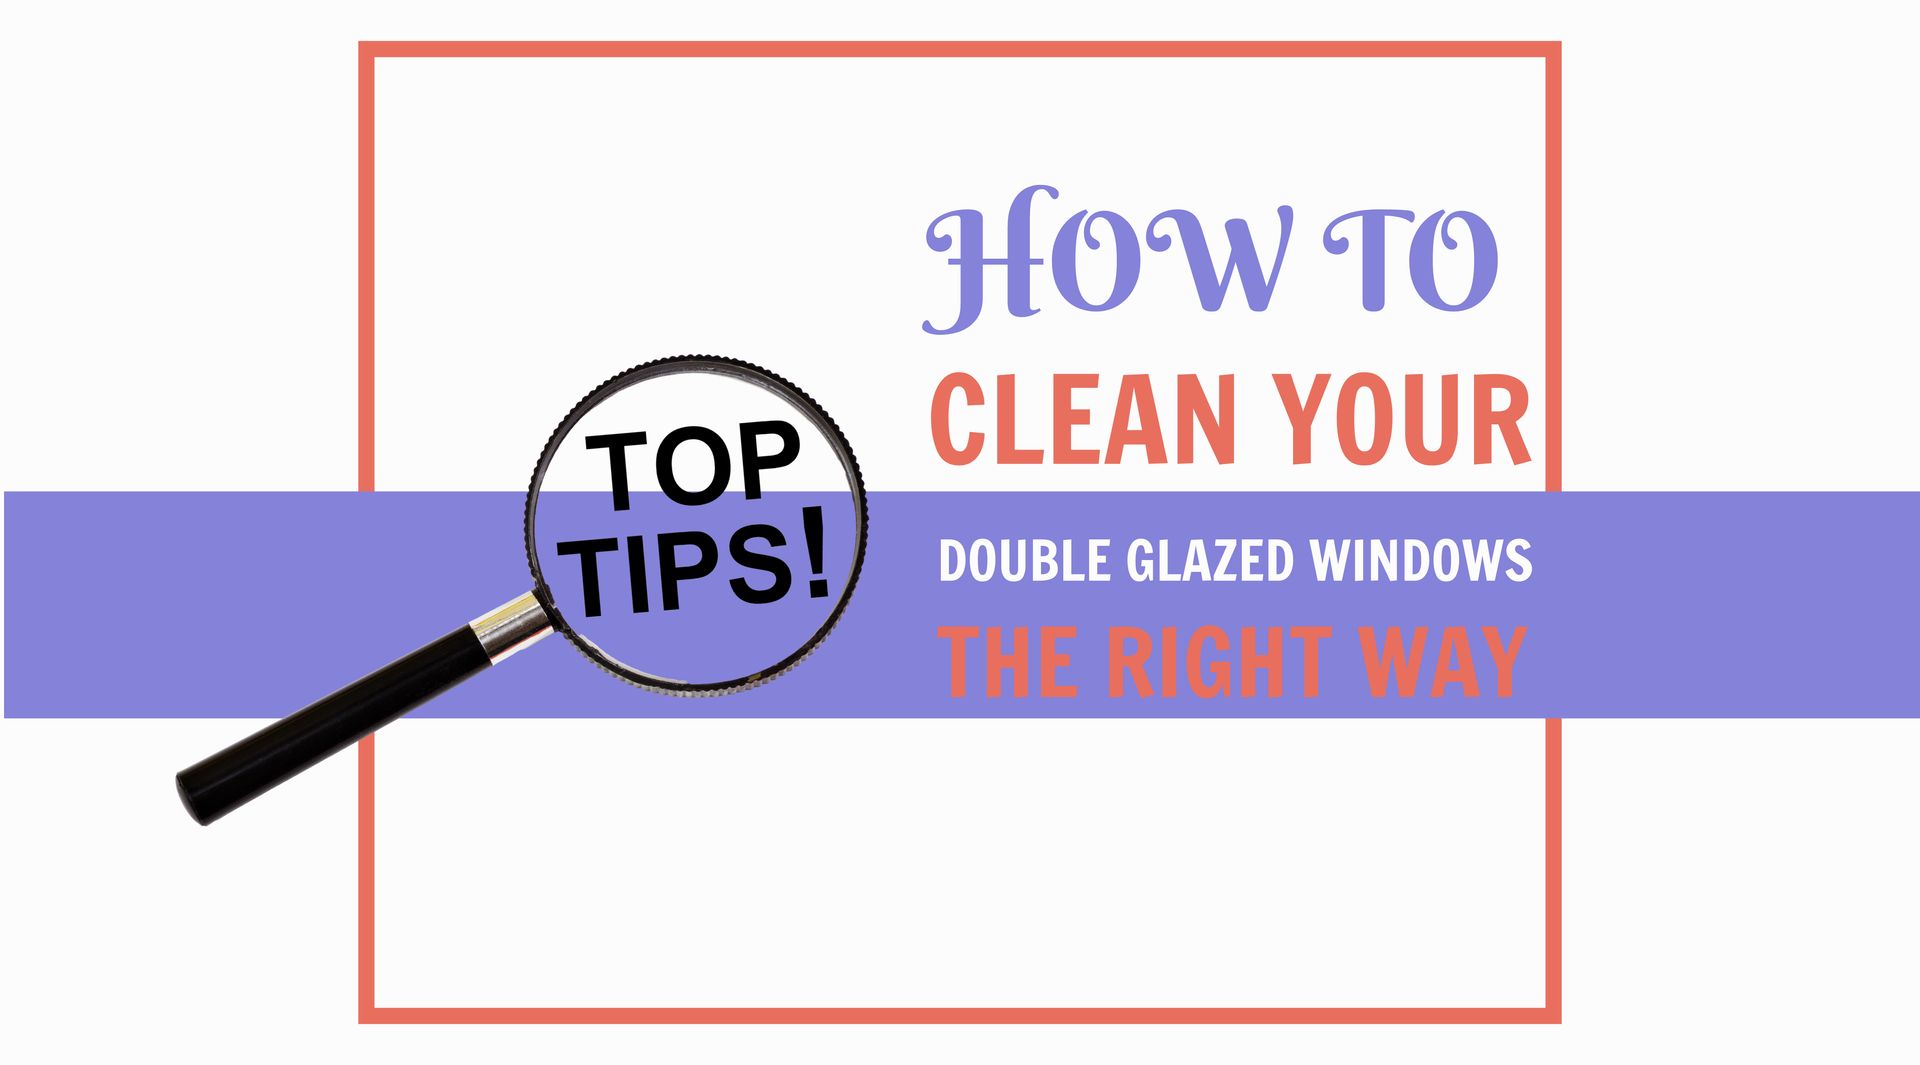 How to Clean Your Double Glazed Windows the Right Way